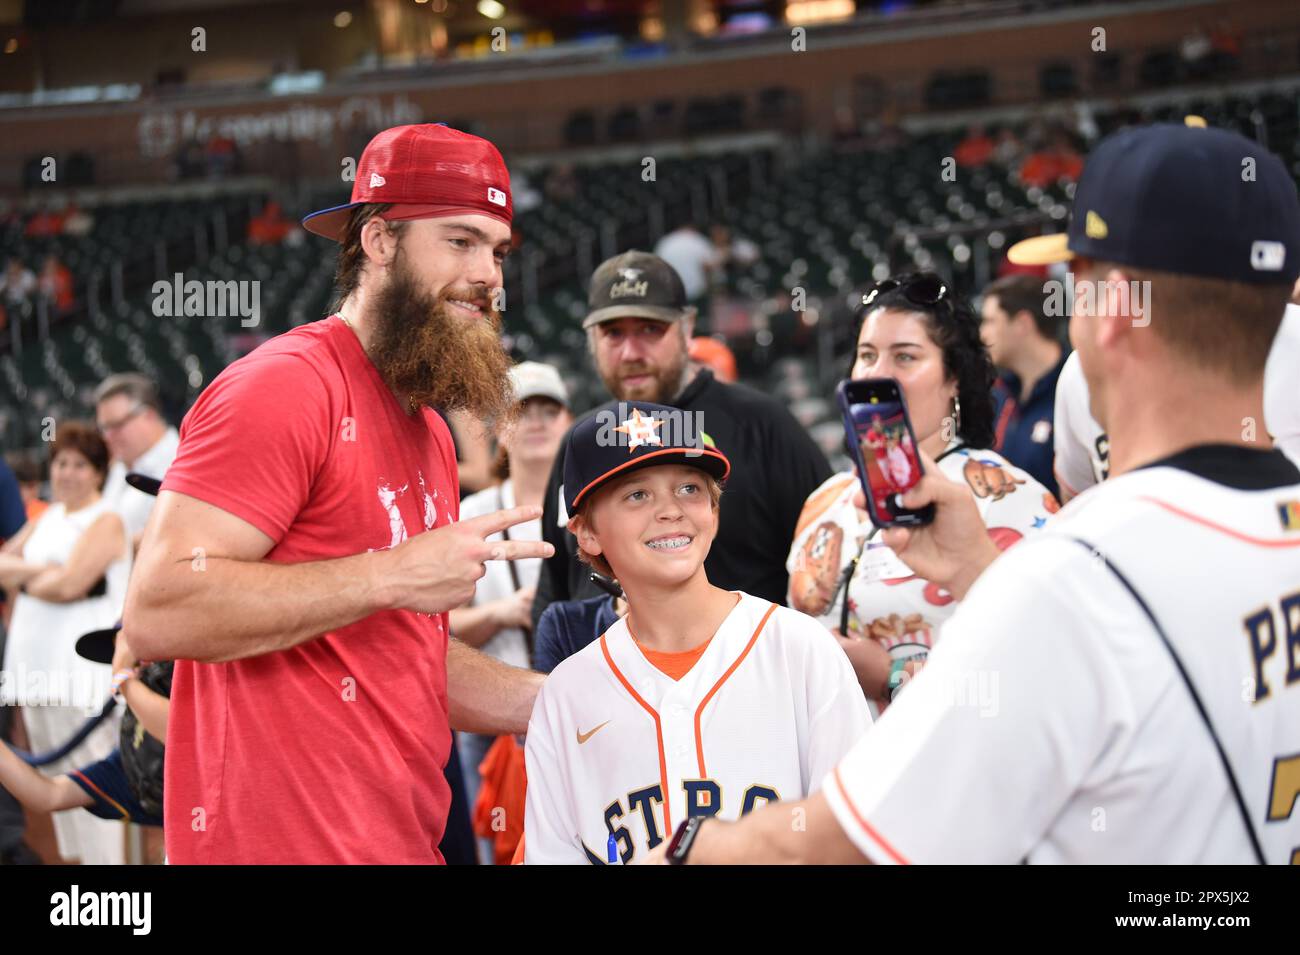 Philadelphia Phillies outfielder BRANDON MARSH poses with a fan during the MLB game between the Philadelphia Phillies and the Houston Astros on Friday Stock Photo